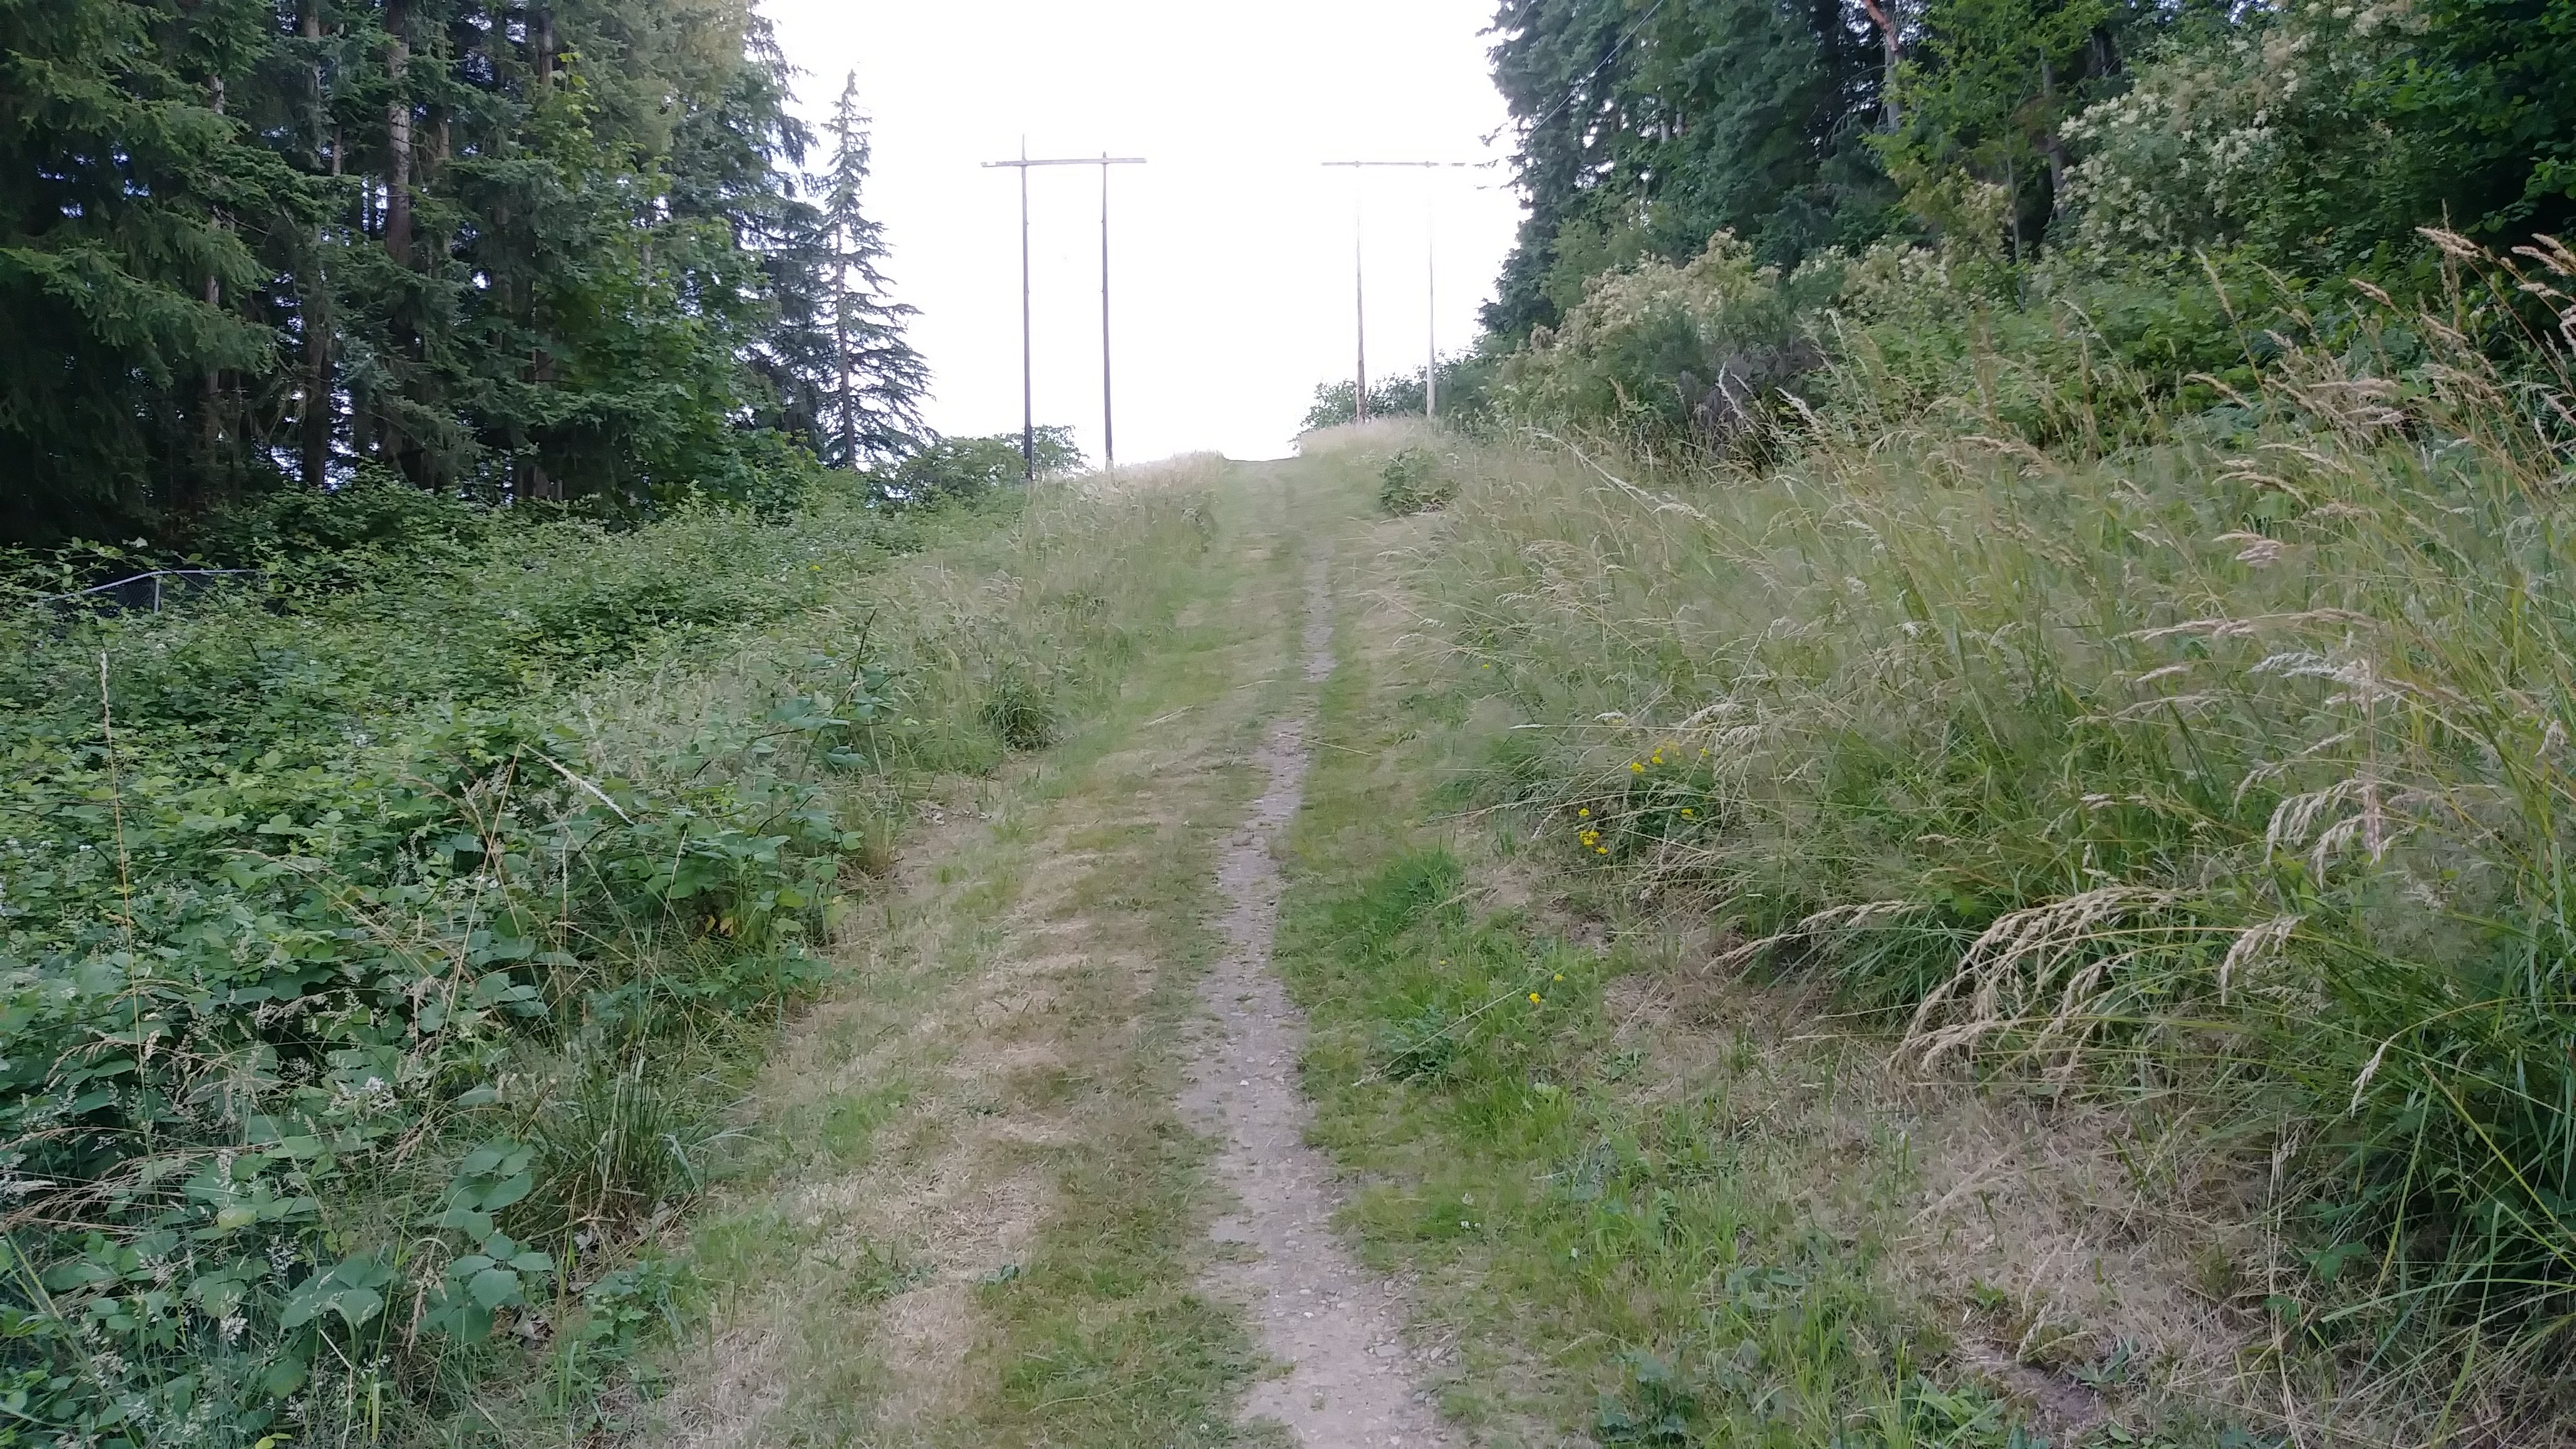 ../images/trails/olympus//03 Trail climbing past Cemetery Woods on left.jpg